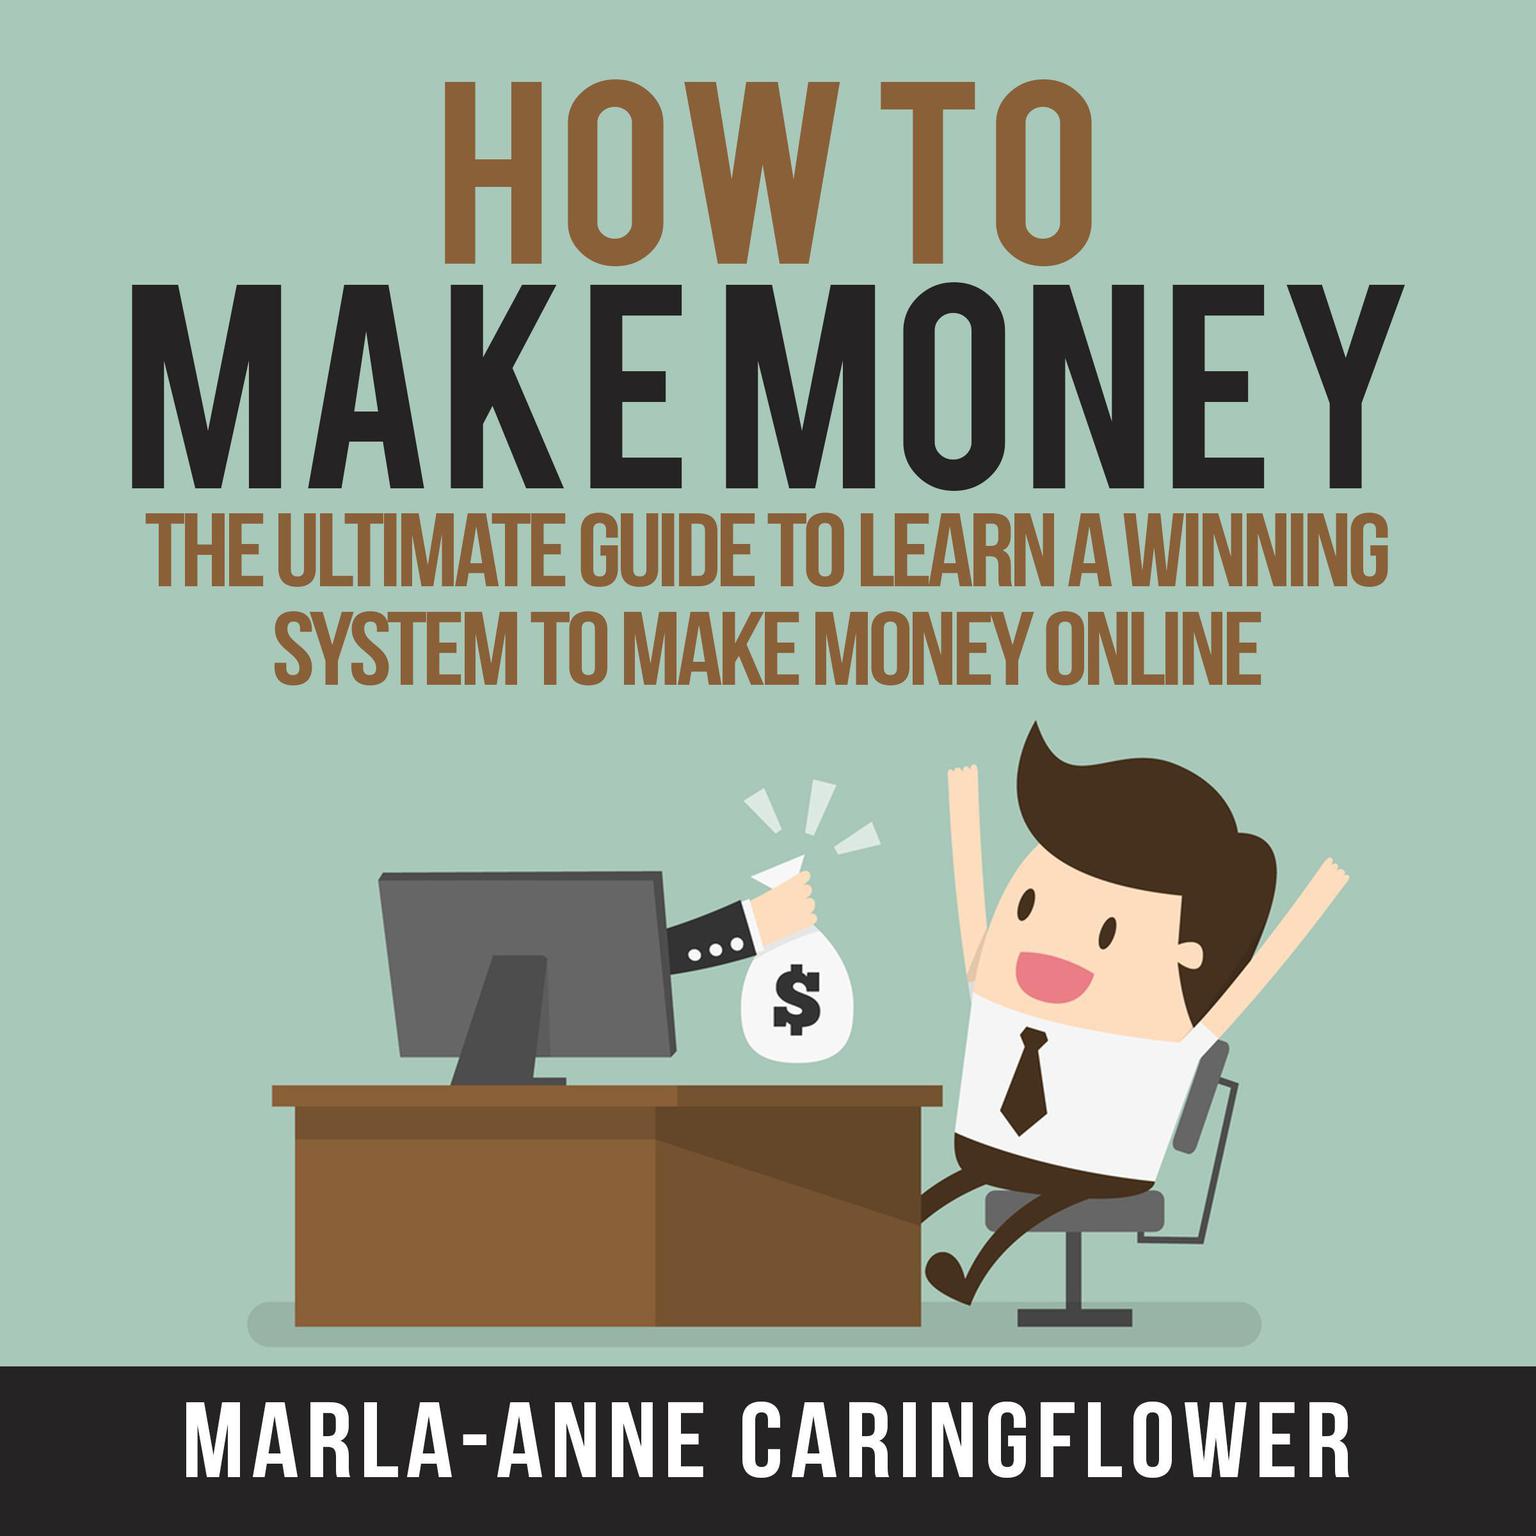 How to Make Money: The Ultimate Guide to Learn A Winning System to Make Money Online Audiobook, by Marla-Anne Caringflower